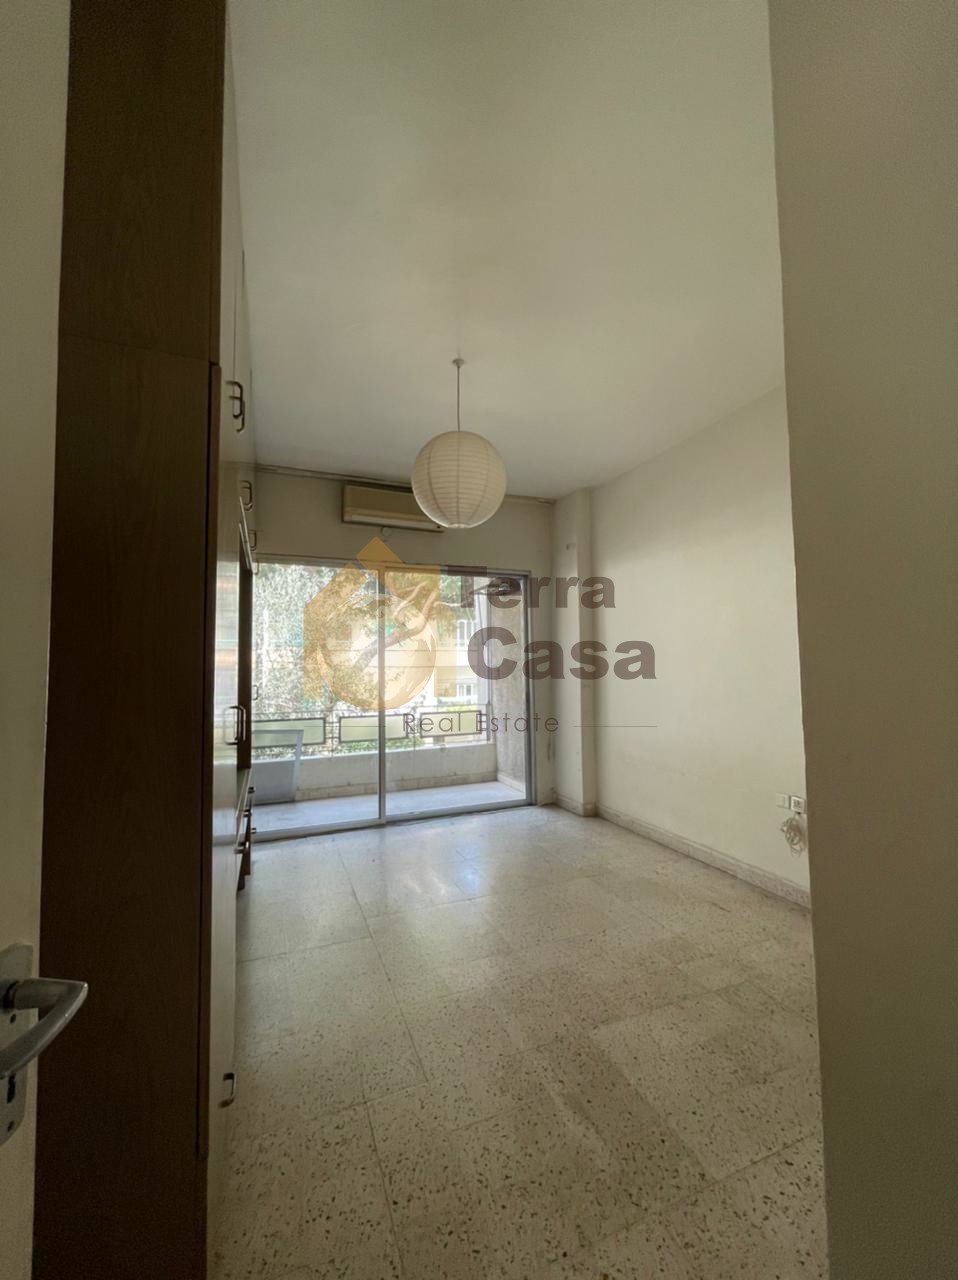 Horch tabet fully decorated apartment nice location.Ref#3701